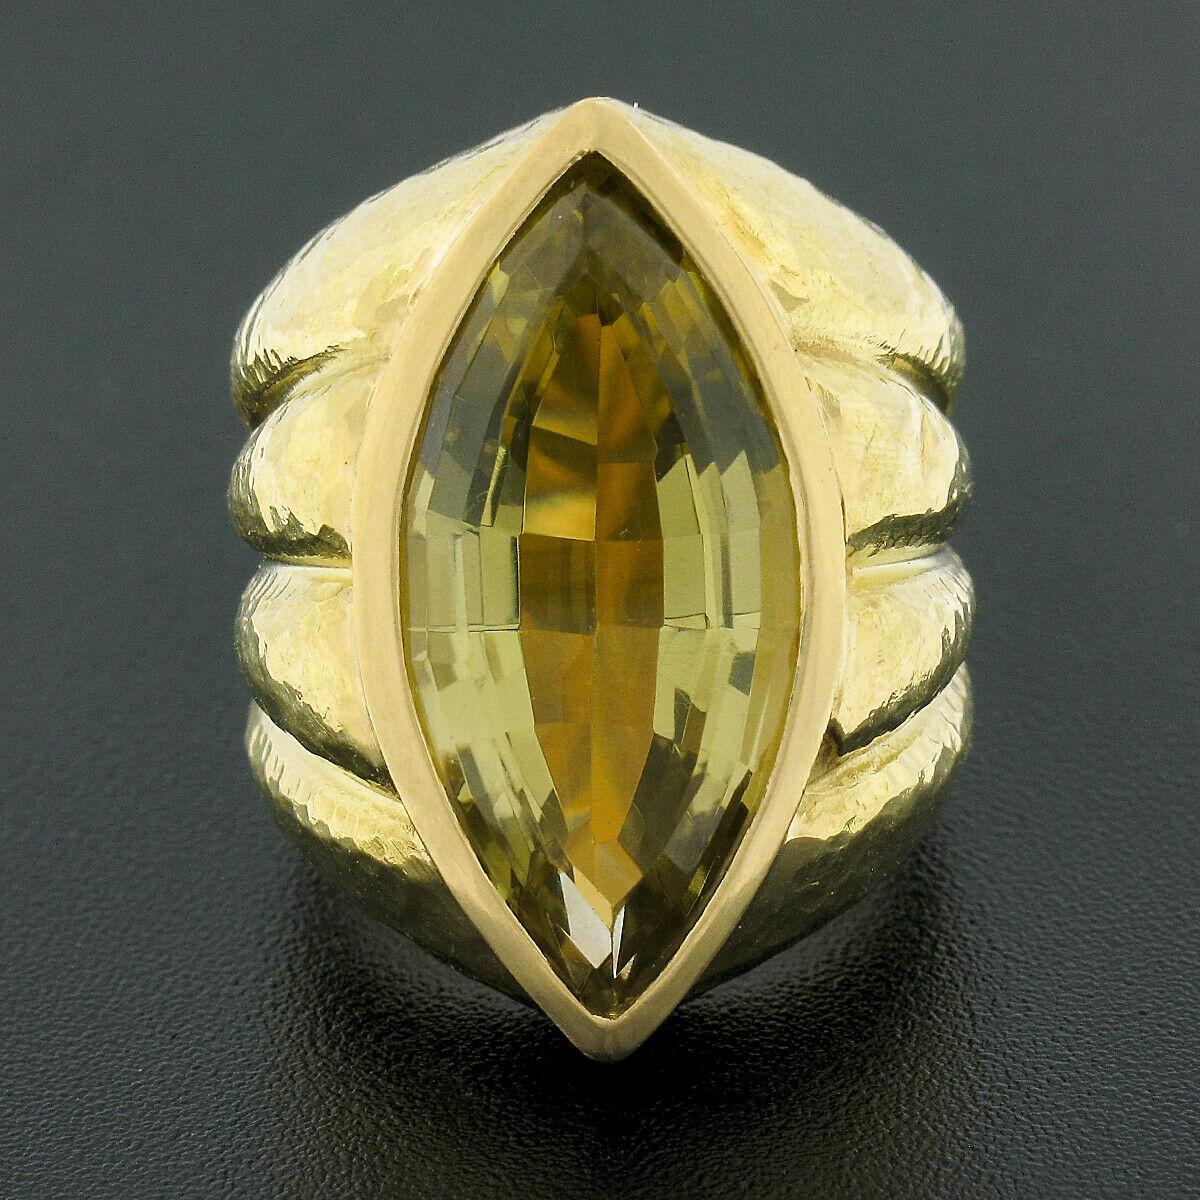 This magnificent cocktail band ring is crafted in 18k yellow gold and was designed by Ruth Satsky featuring a magnificent, marquise cut, lemon quartz neatly bezel set at the center of a polished finish frame. The large and stunning solitaire